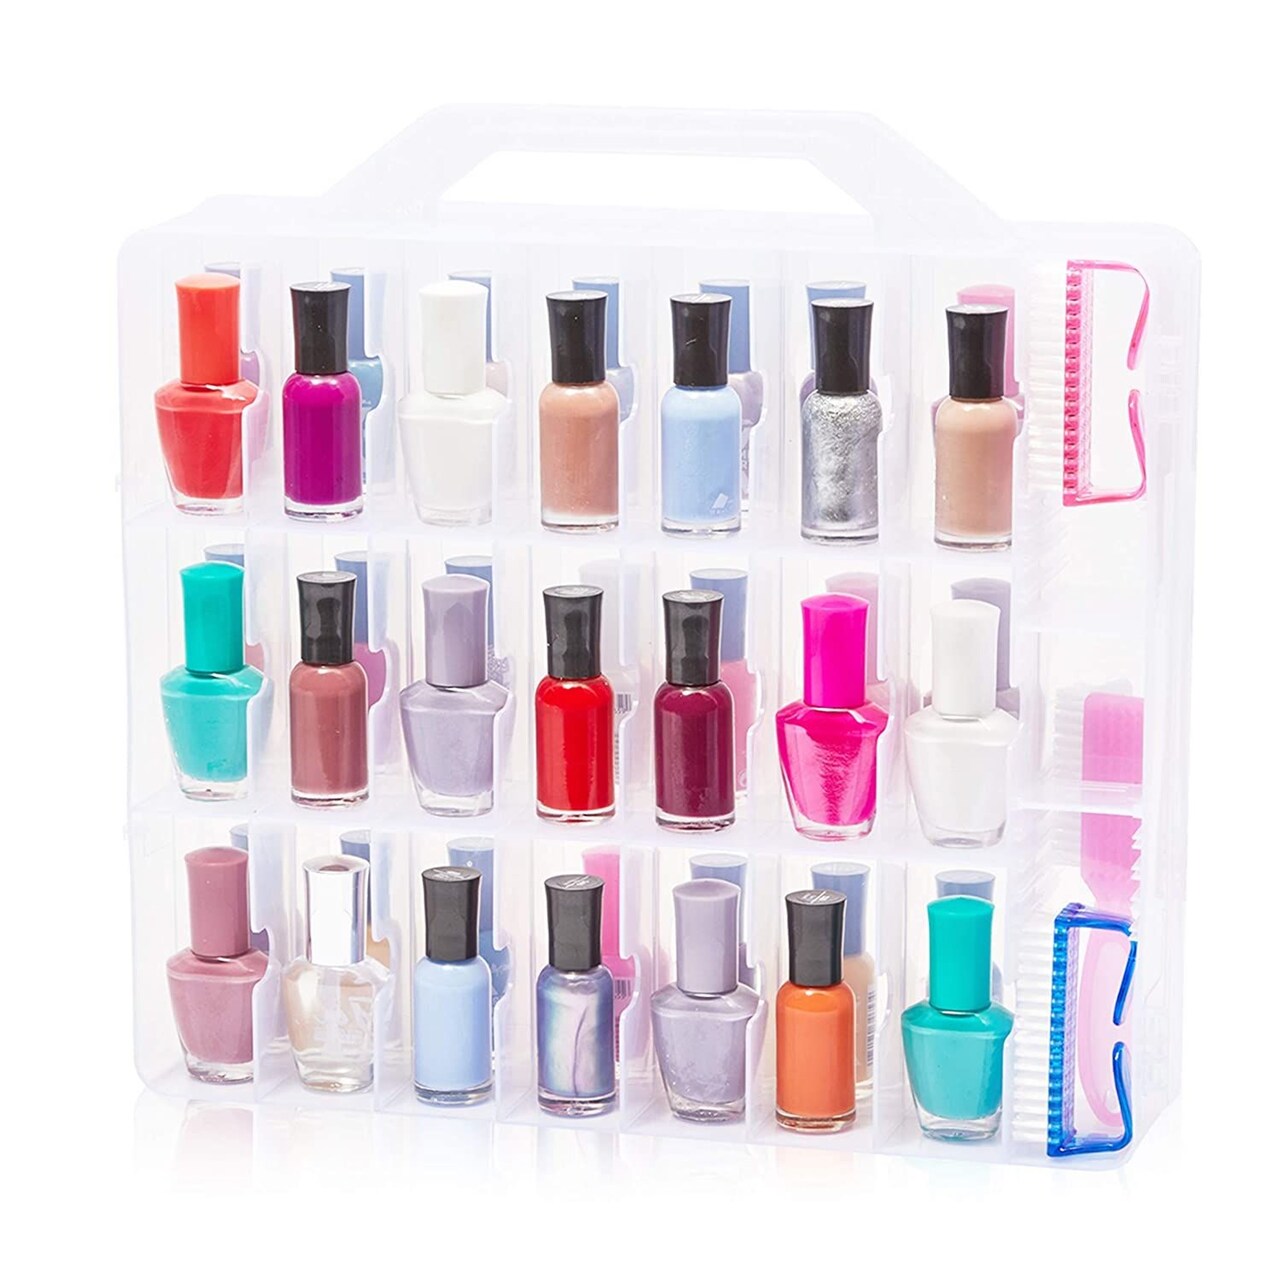 Nail Polish Caddy Holder for 48 Bottles (13.78 x 13.39 x 3.15 In